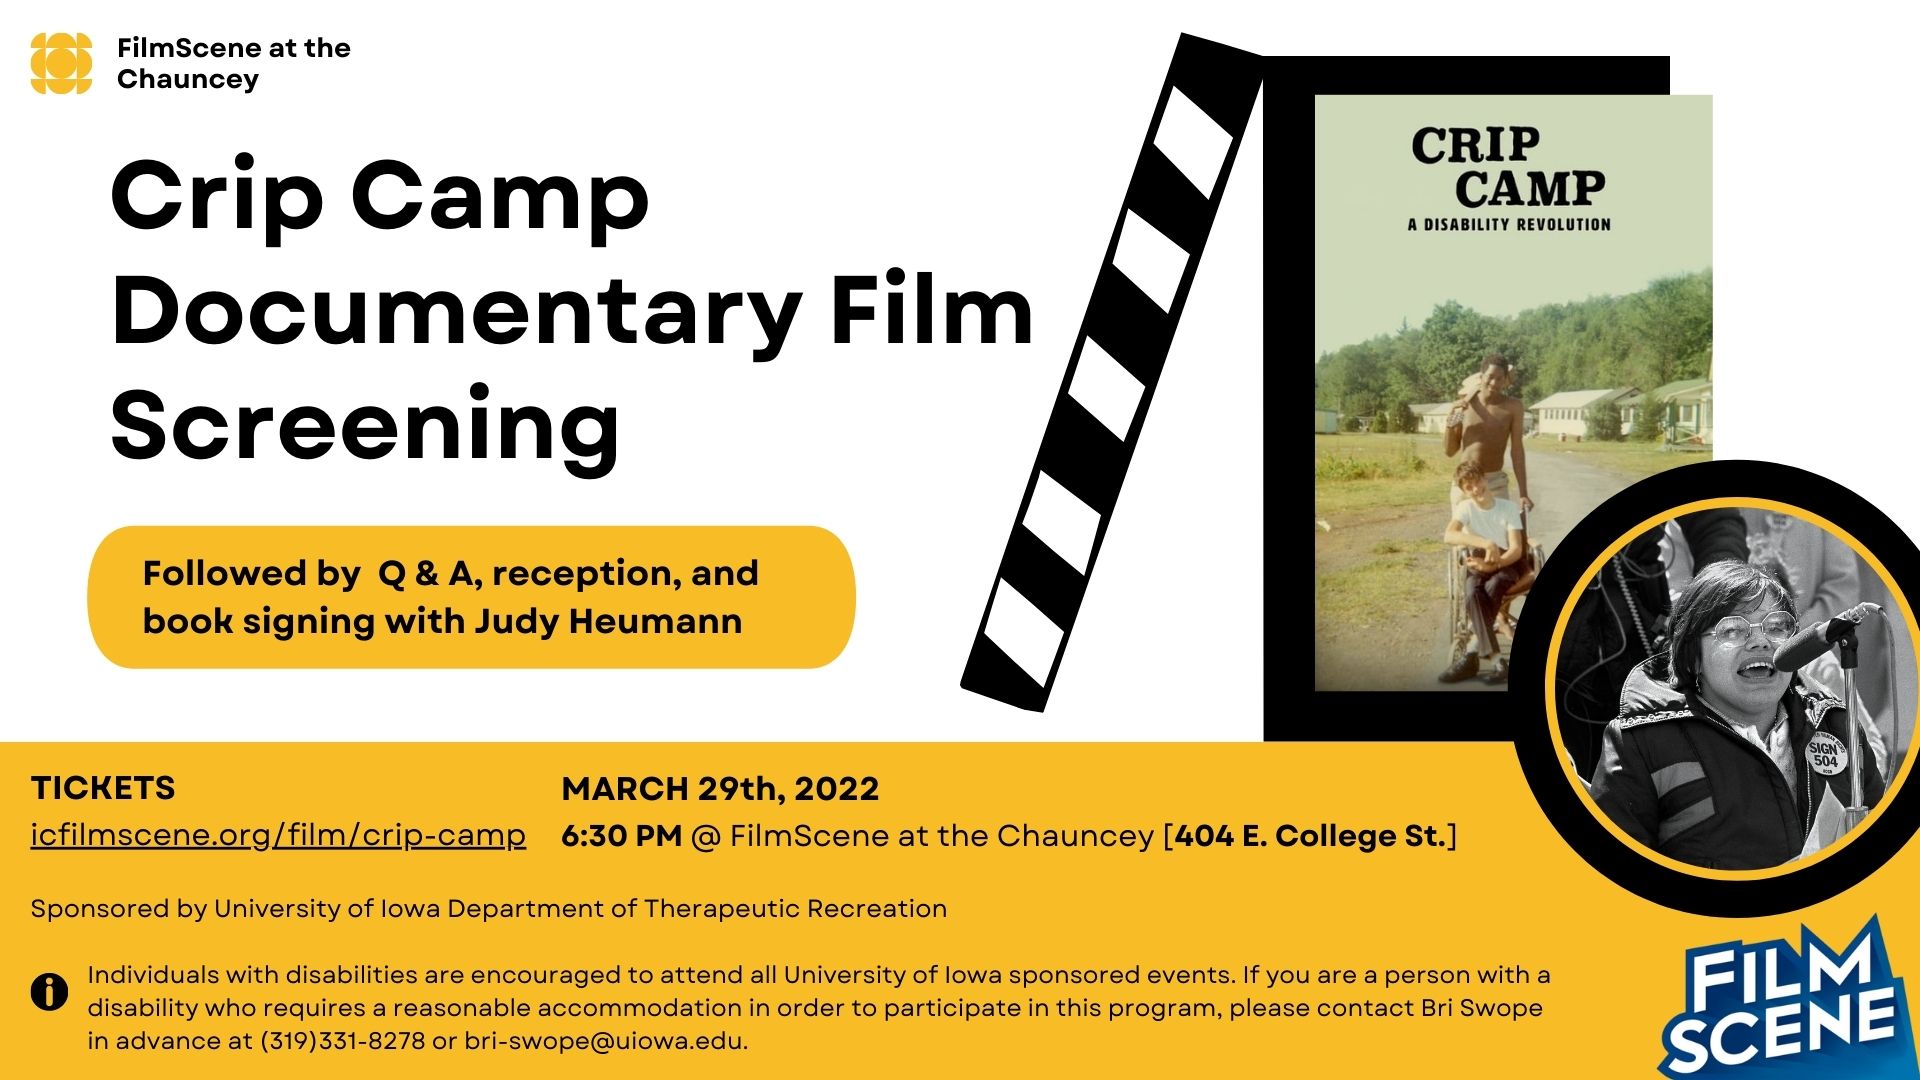 Images from Crip camp a disability revolution on March 29th at 6:30pm more information at Film Scene at the Chauncey